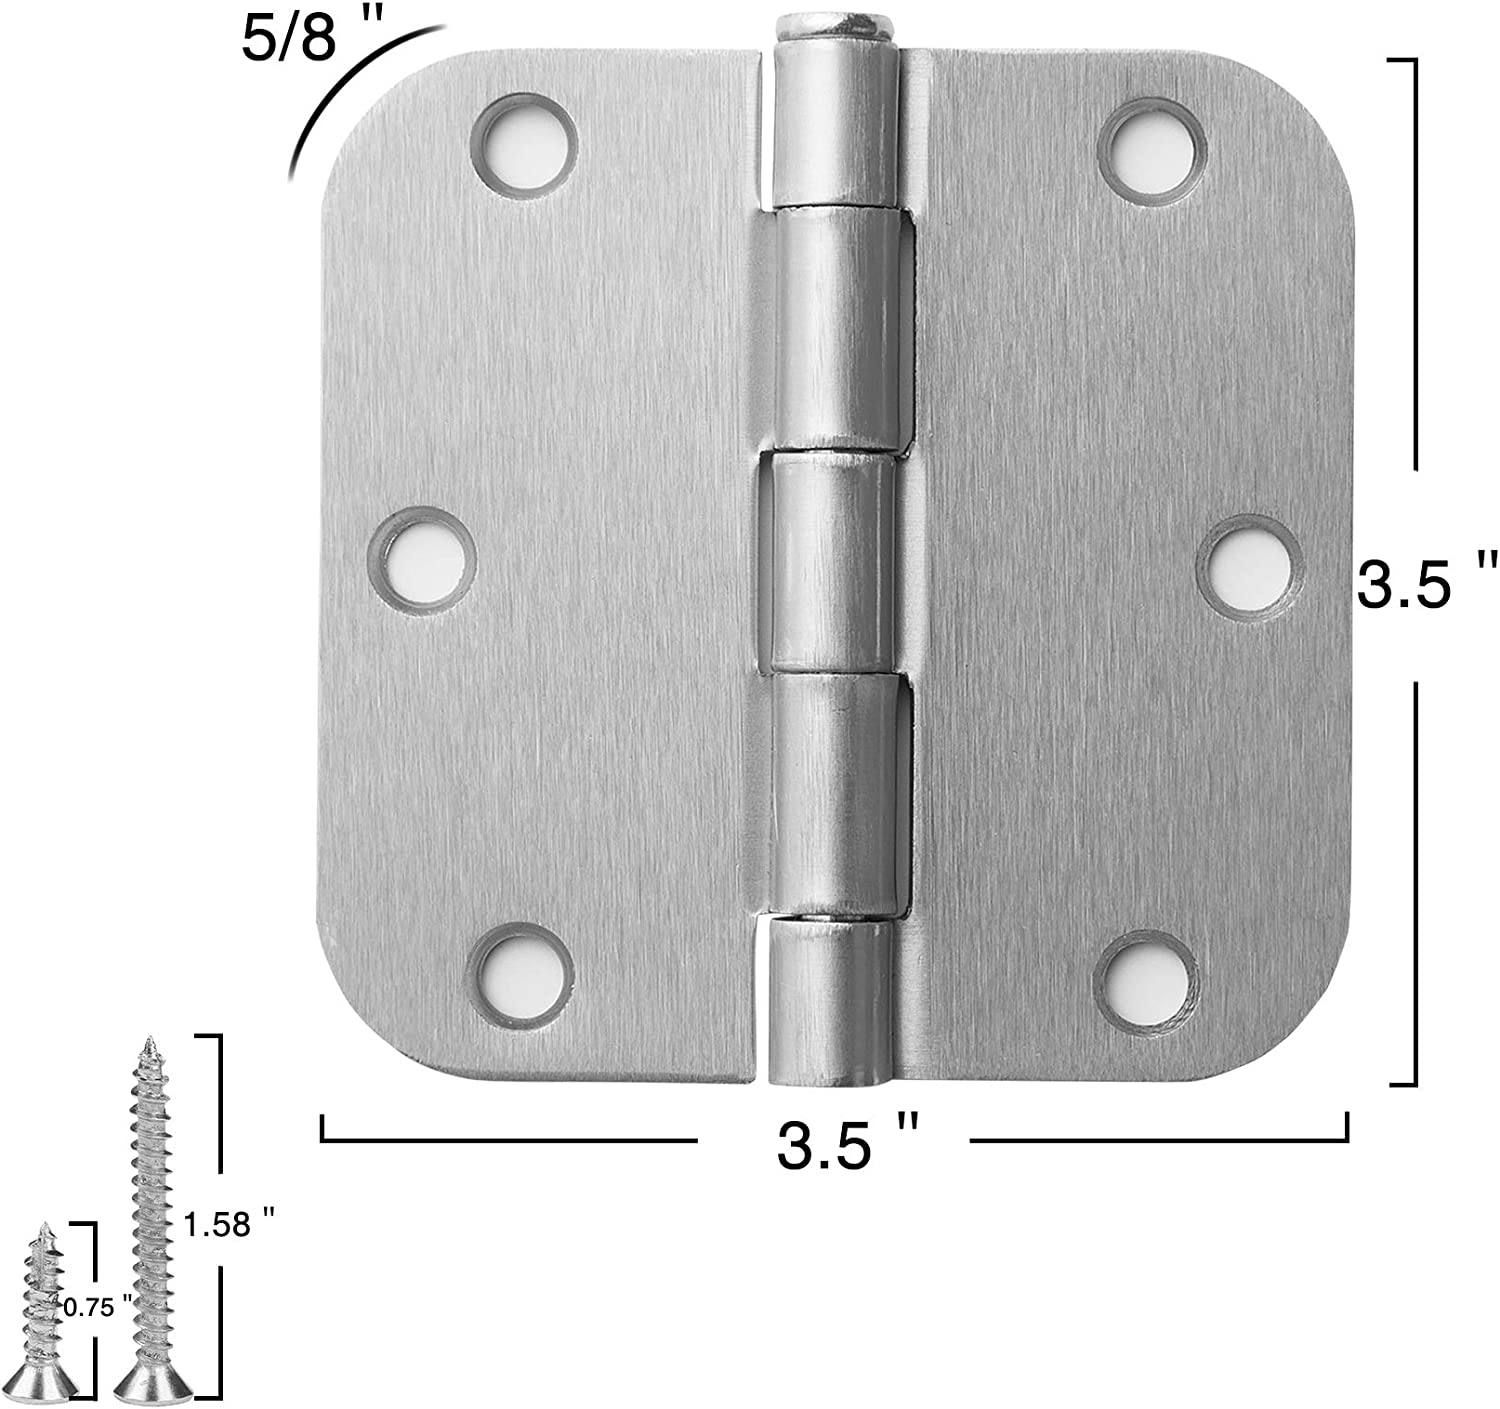 3.5 inch satin chrome rounded door hinges